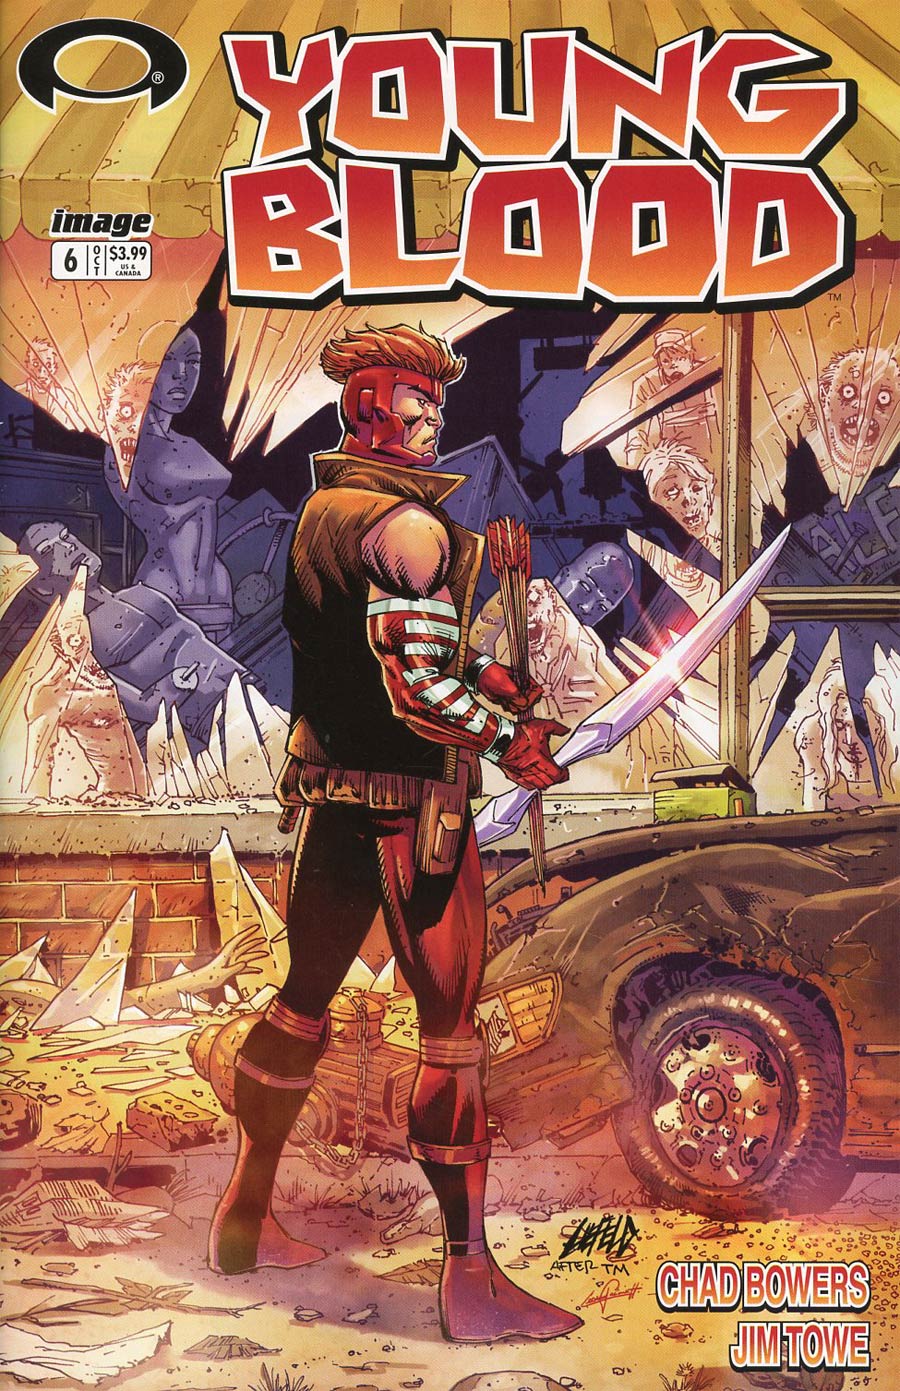 Youngblood Vol 5 #6 Cover C Variant Rob Liefeld Walking Dead 1 Tribute Color Cover